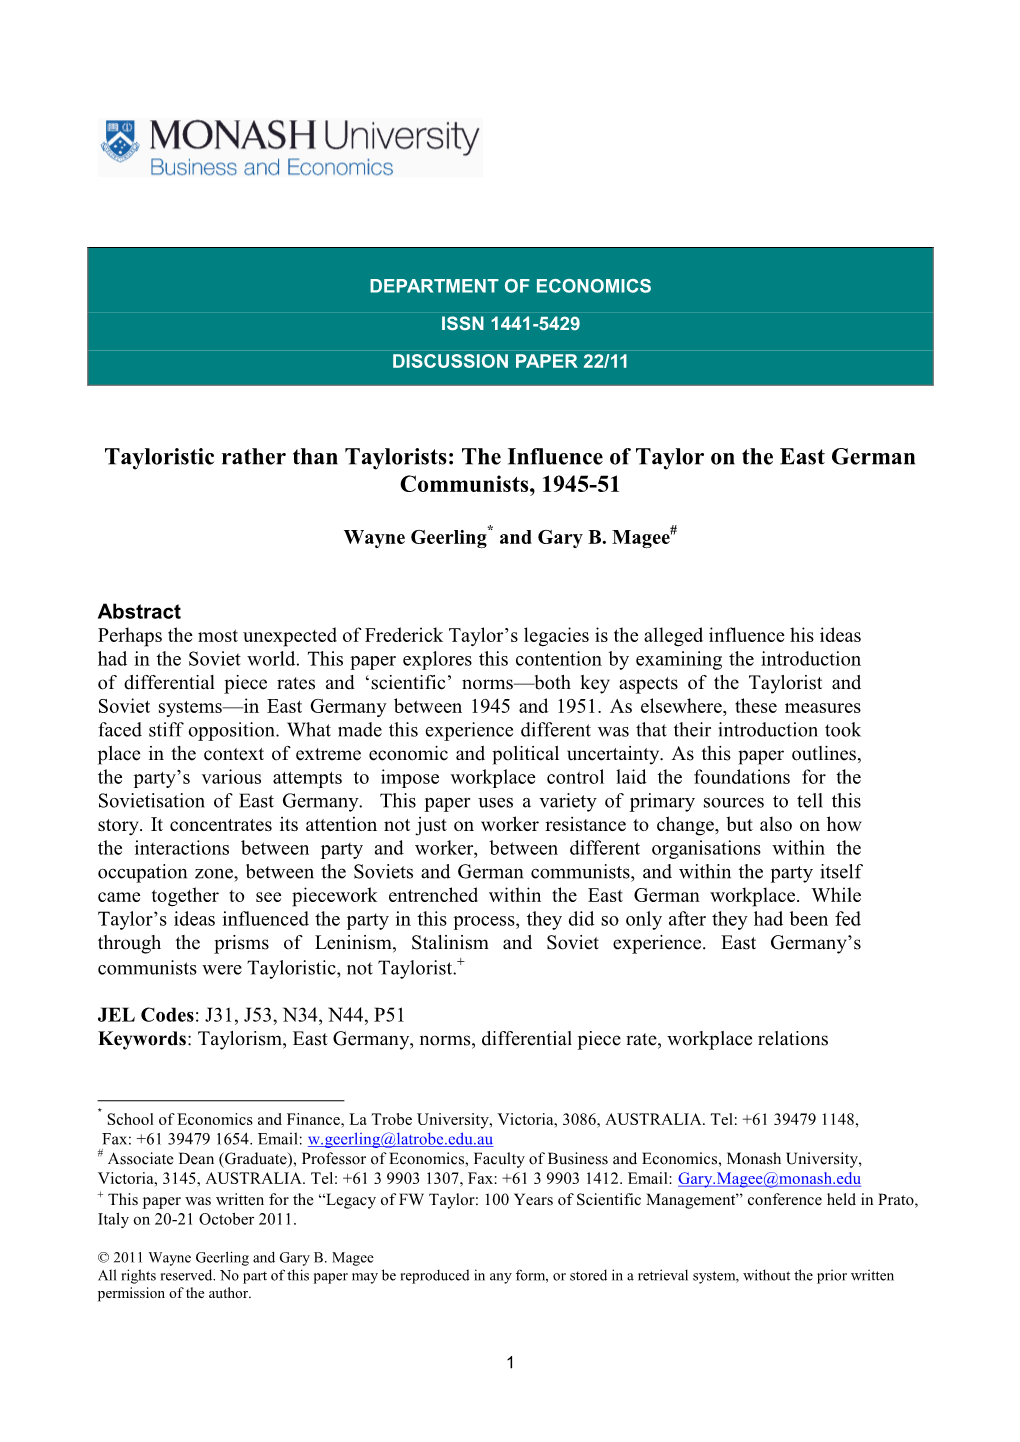 The Influence of Taylor on the East German Communists, 1945-51